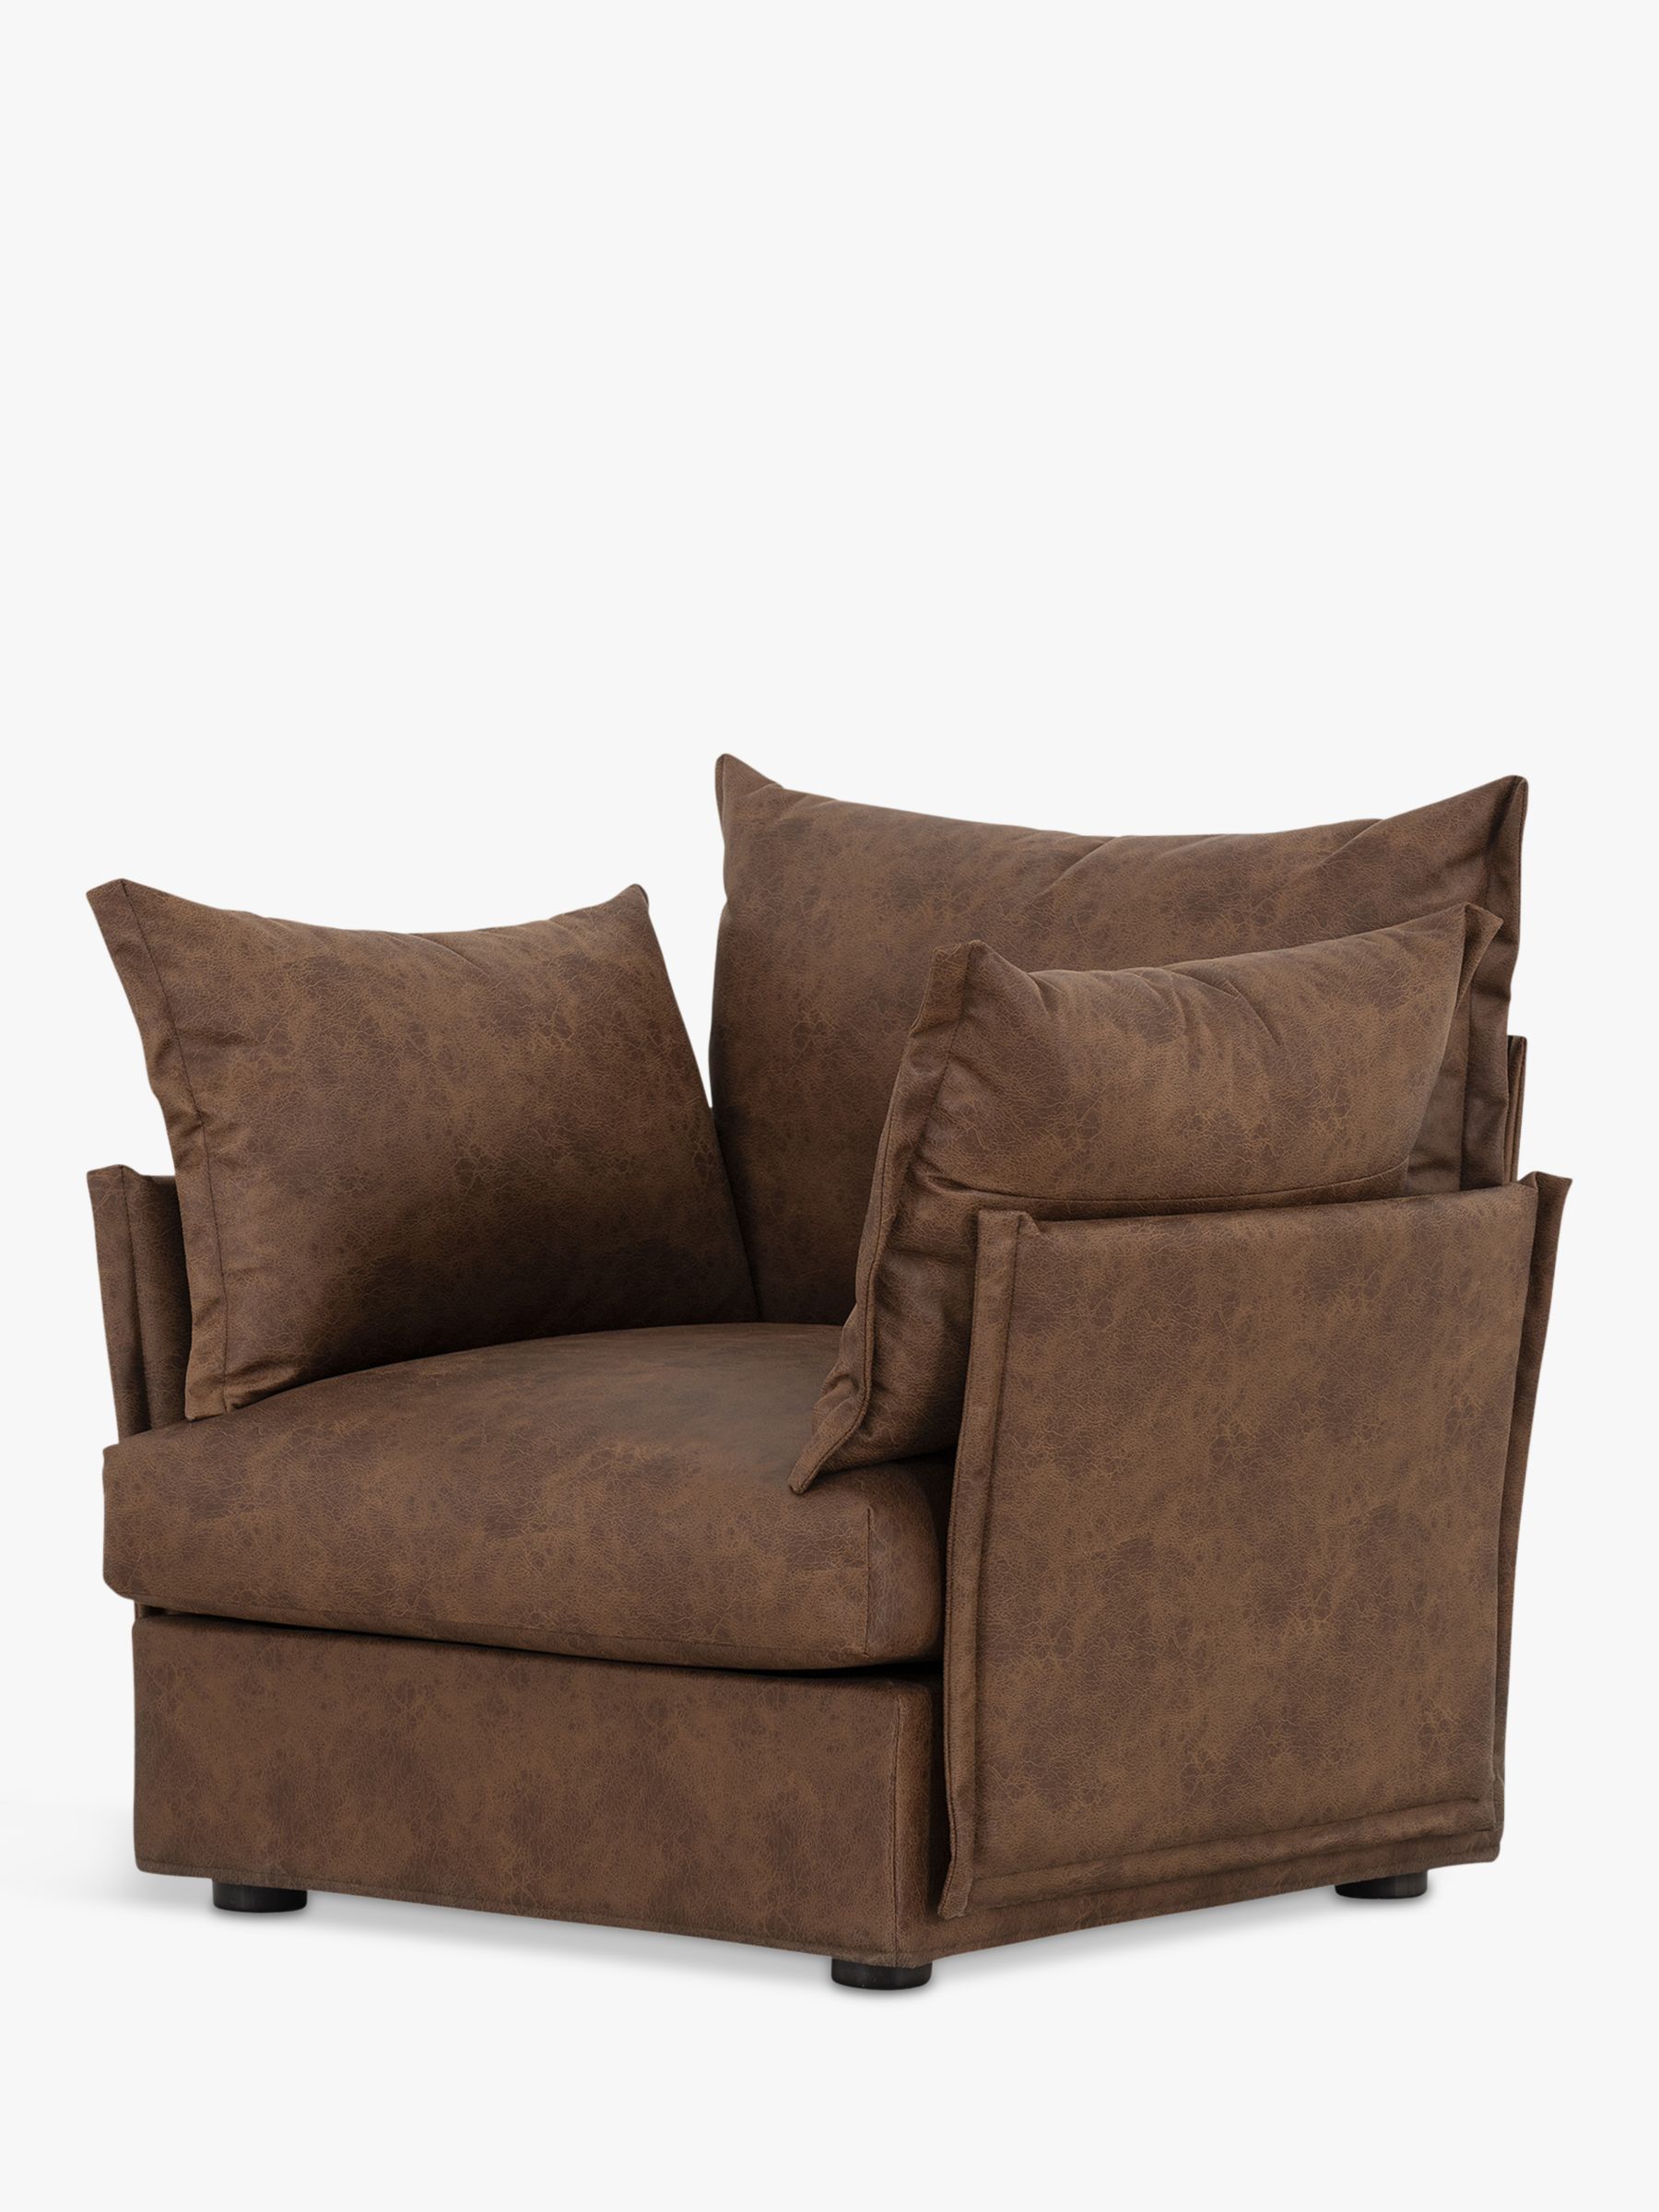 Photo of Swyft model 06 faux leather armchair chestnut